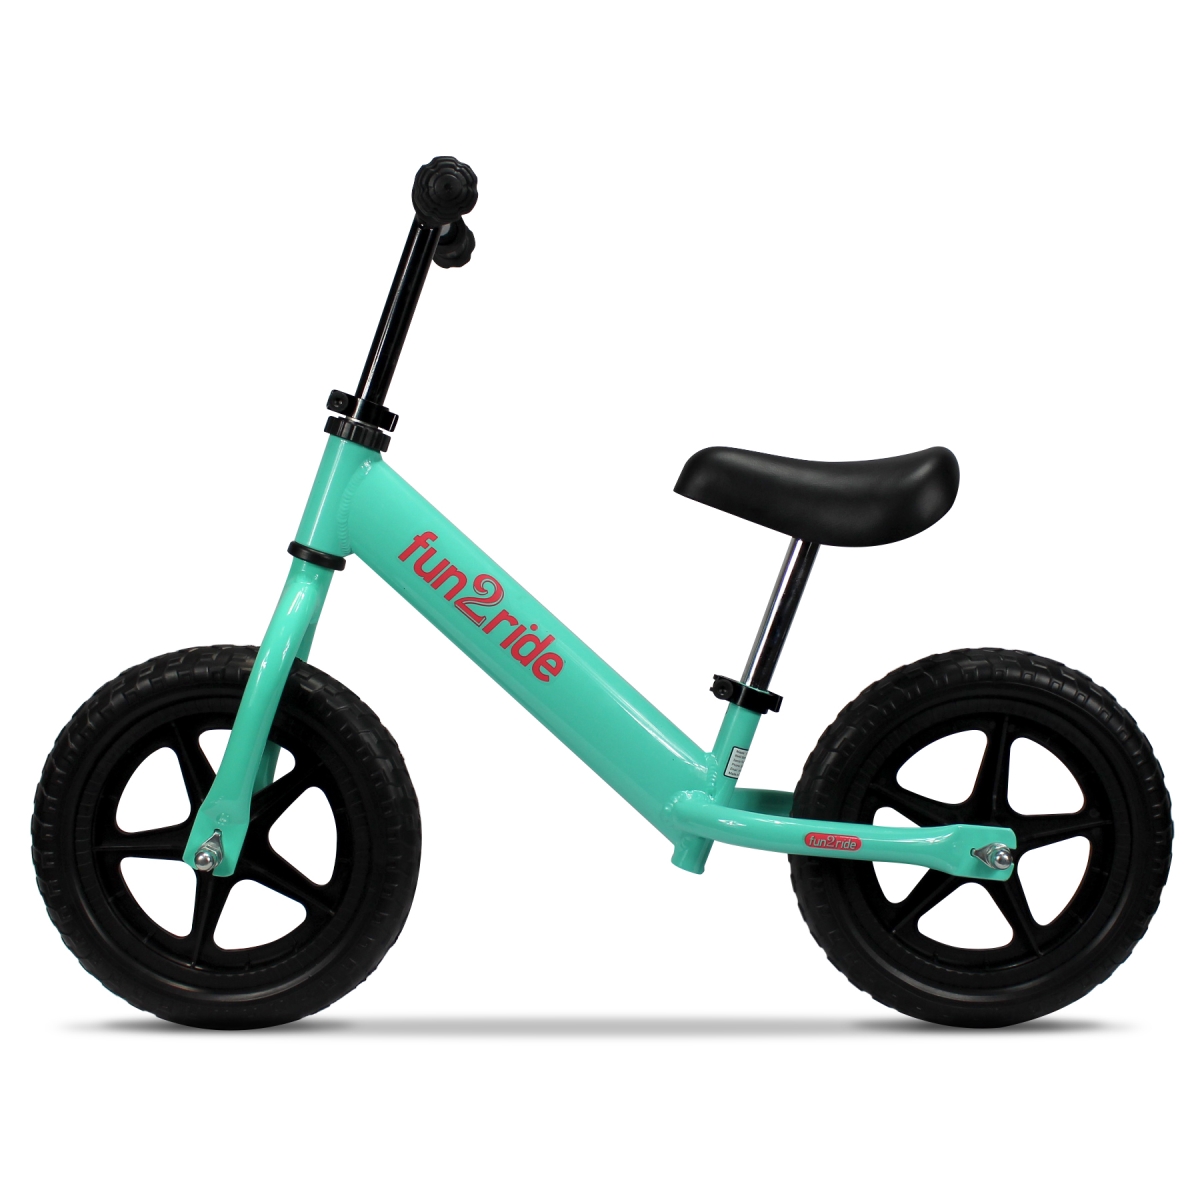 F2r-mt Unisex Lightweight Kids Balance Bike With 12 In. Puncture Resistant Tires, Mint